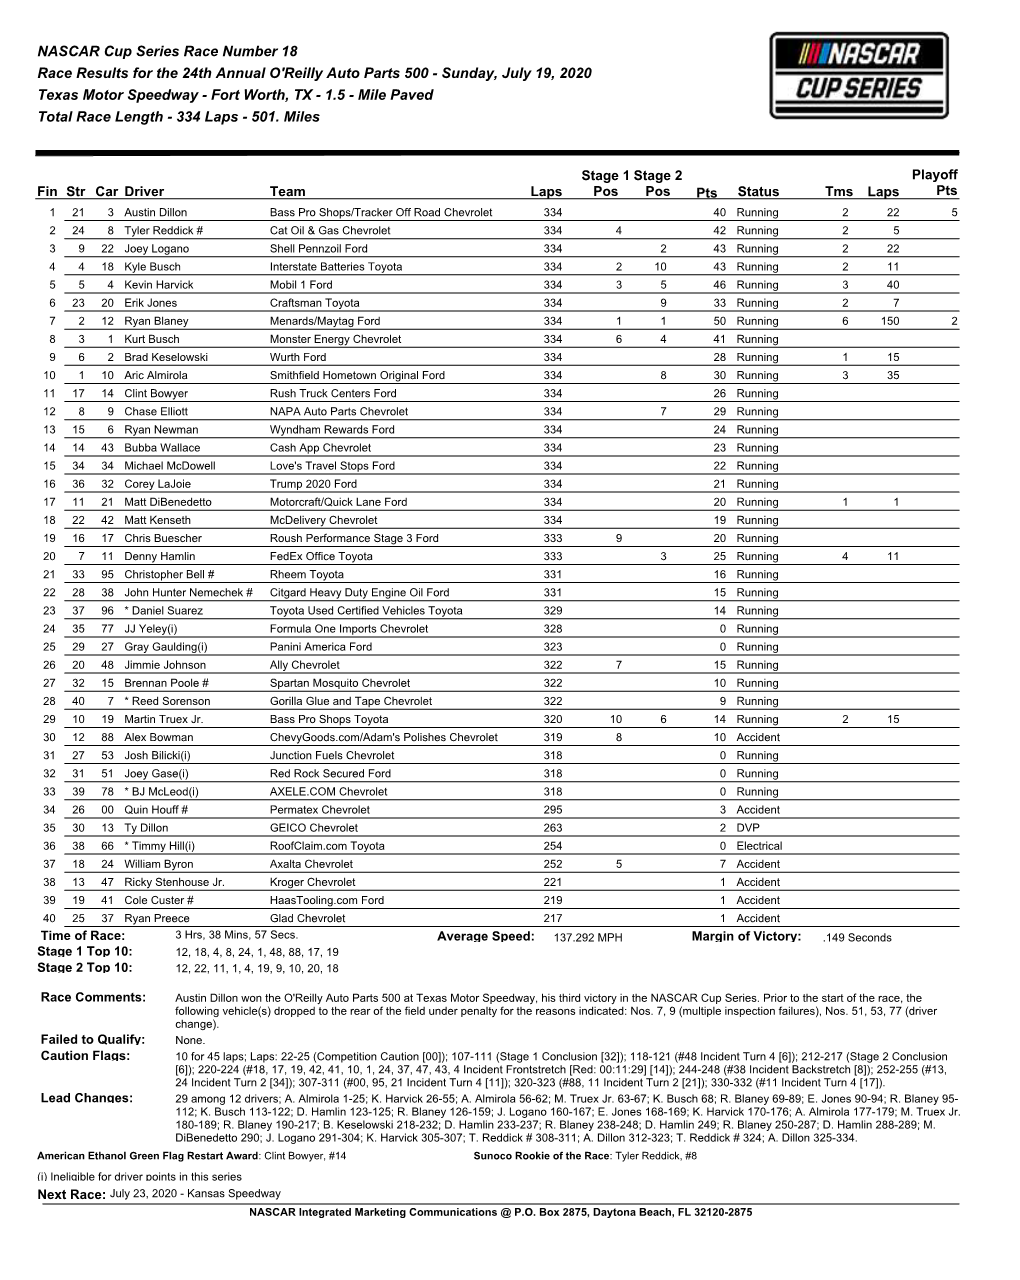 NASCAR Cup Series Race Number 18 Race Results for the 24Th Annual O'reilly Auto Parts